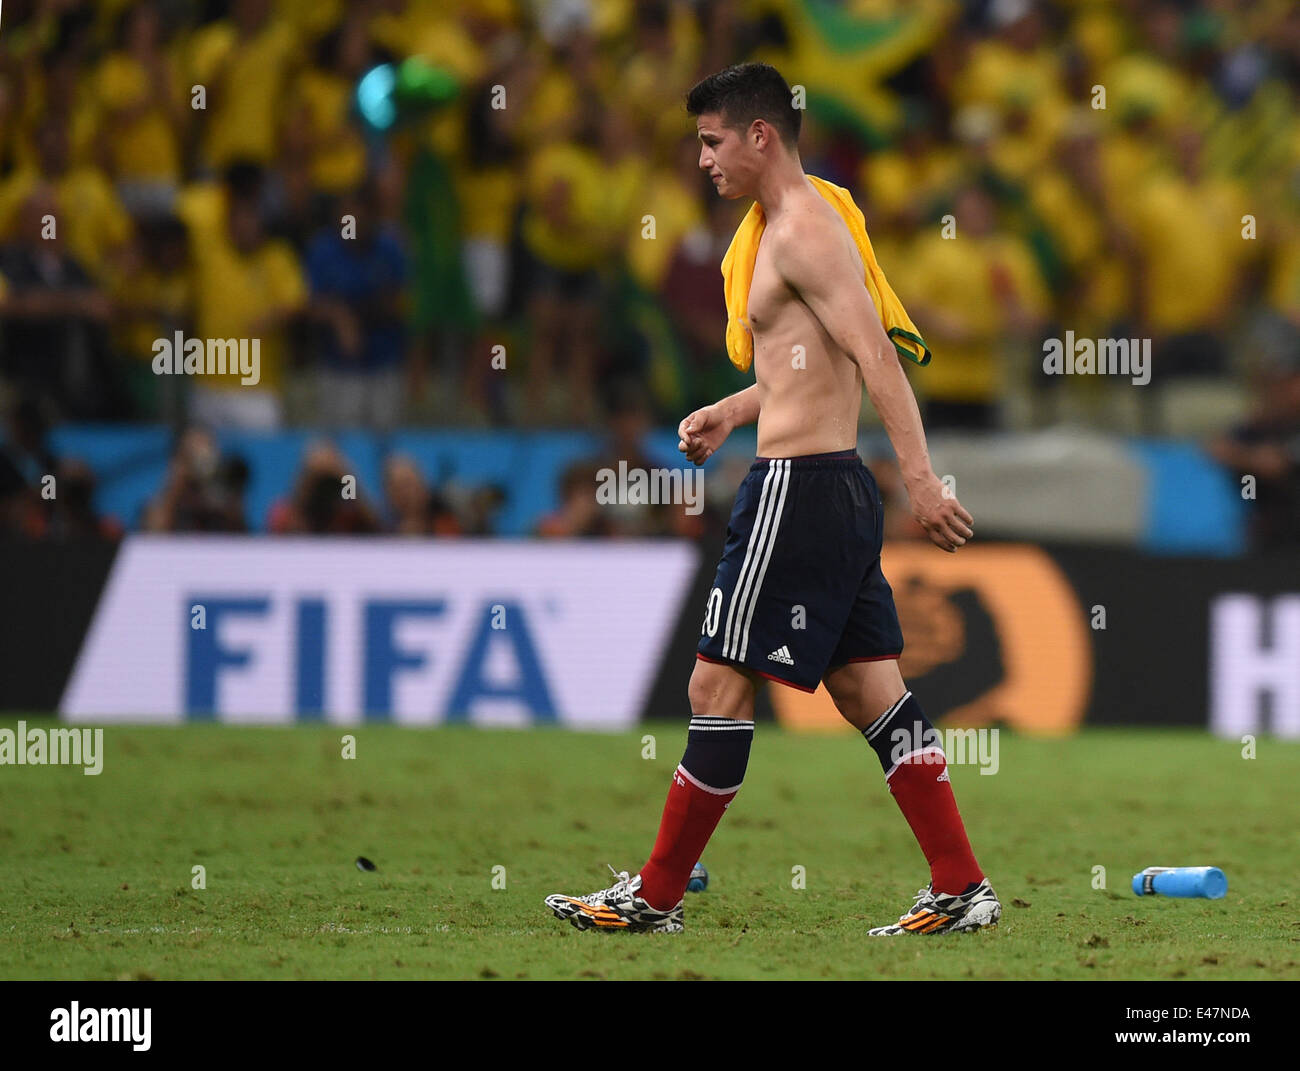 Fortaleza, Brazil. 04th July, 2014. James Rodriguez of Colombia leaves the pitch after the FIFA World Cup 2014 quarter final match soccer between Brazil and Colombia at the Estadio Castelao in Fortaleza, Brazil, 04 July 2014. Photo: Marius Becker/dpa/Alamy Live News Stock Photo